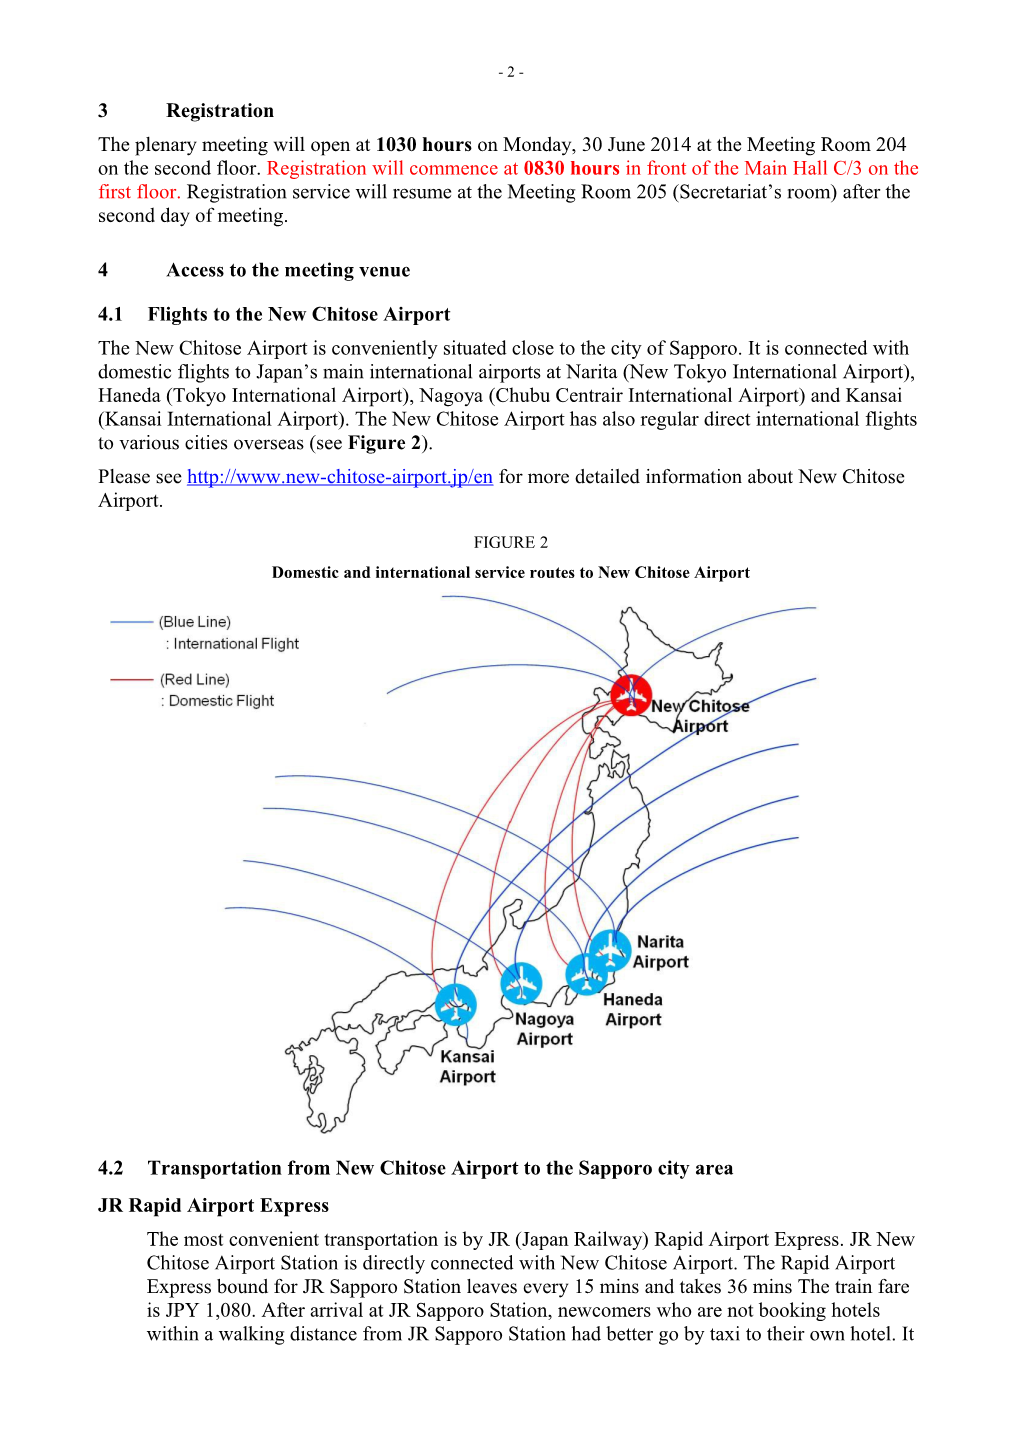 Practical Information for the SG16 Meeting in Sapporo, Japan